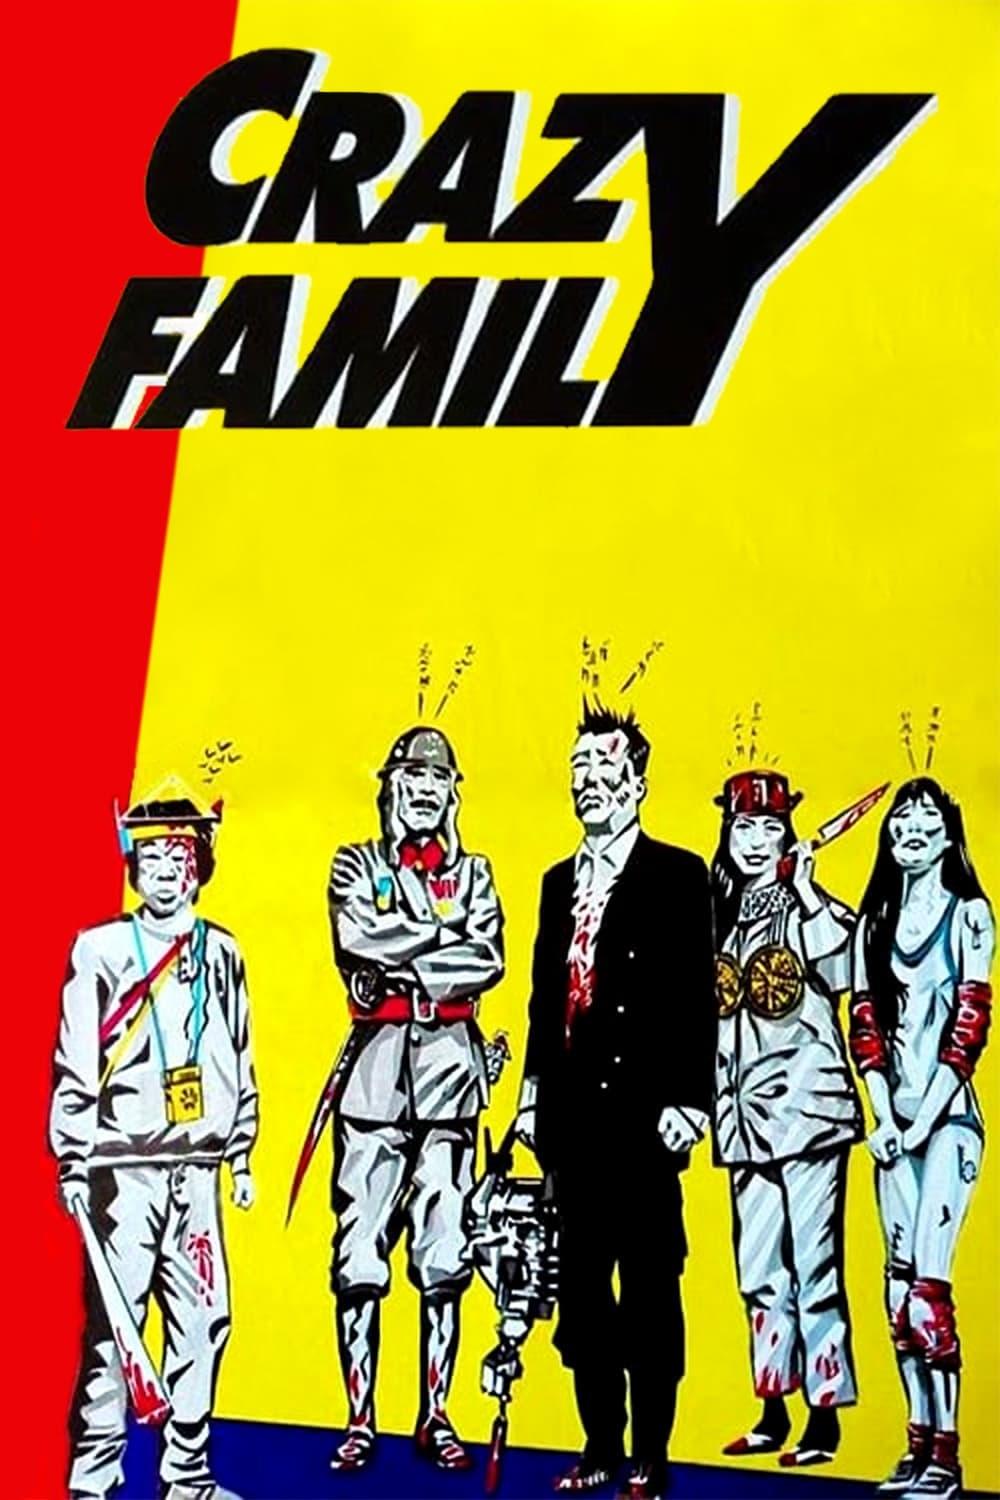 The Crazy Family poster